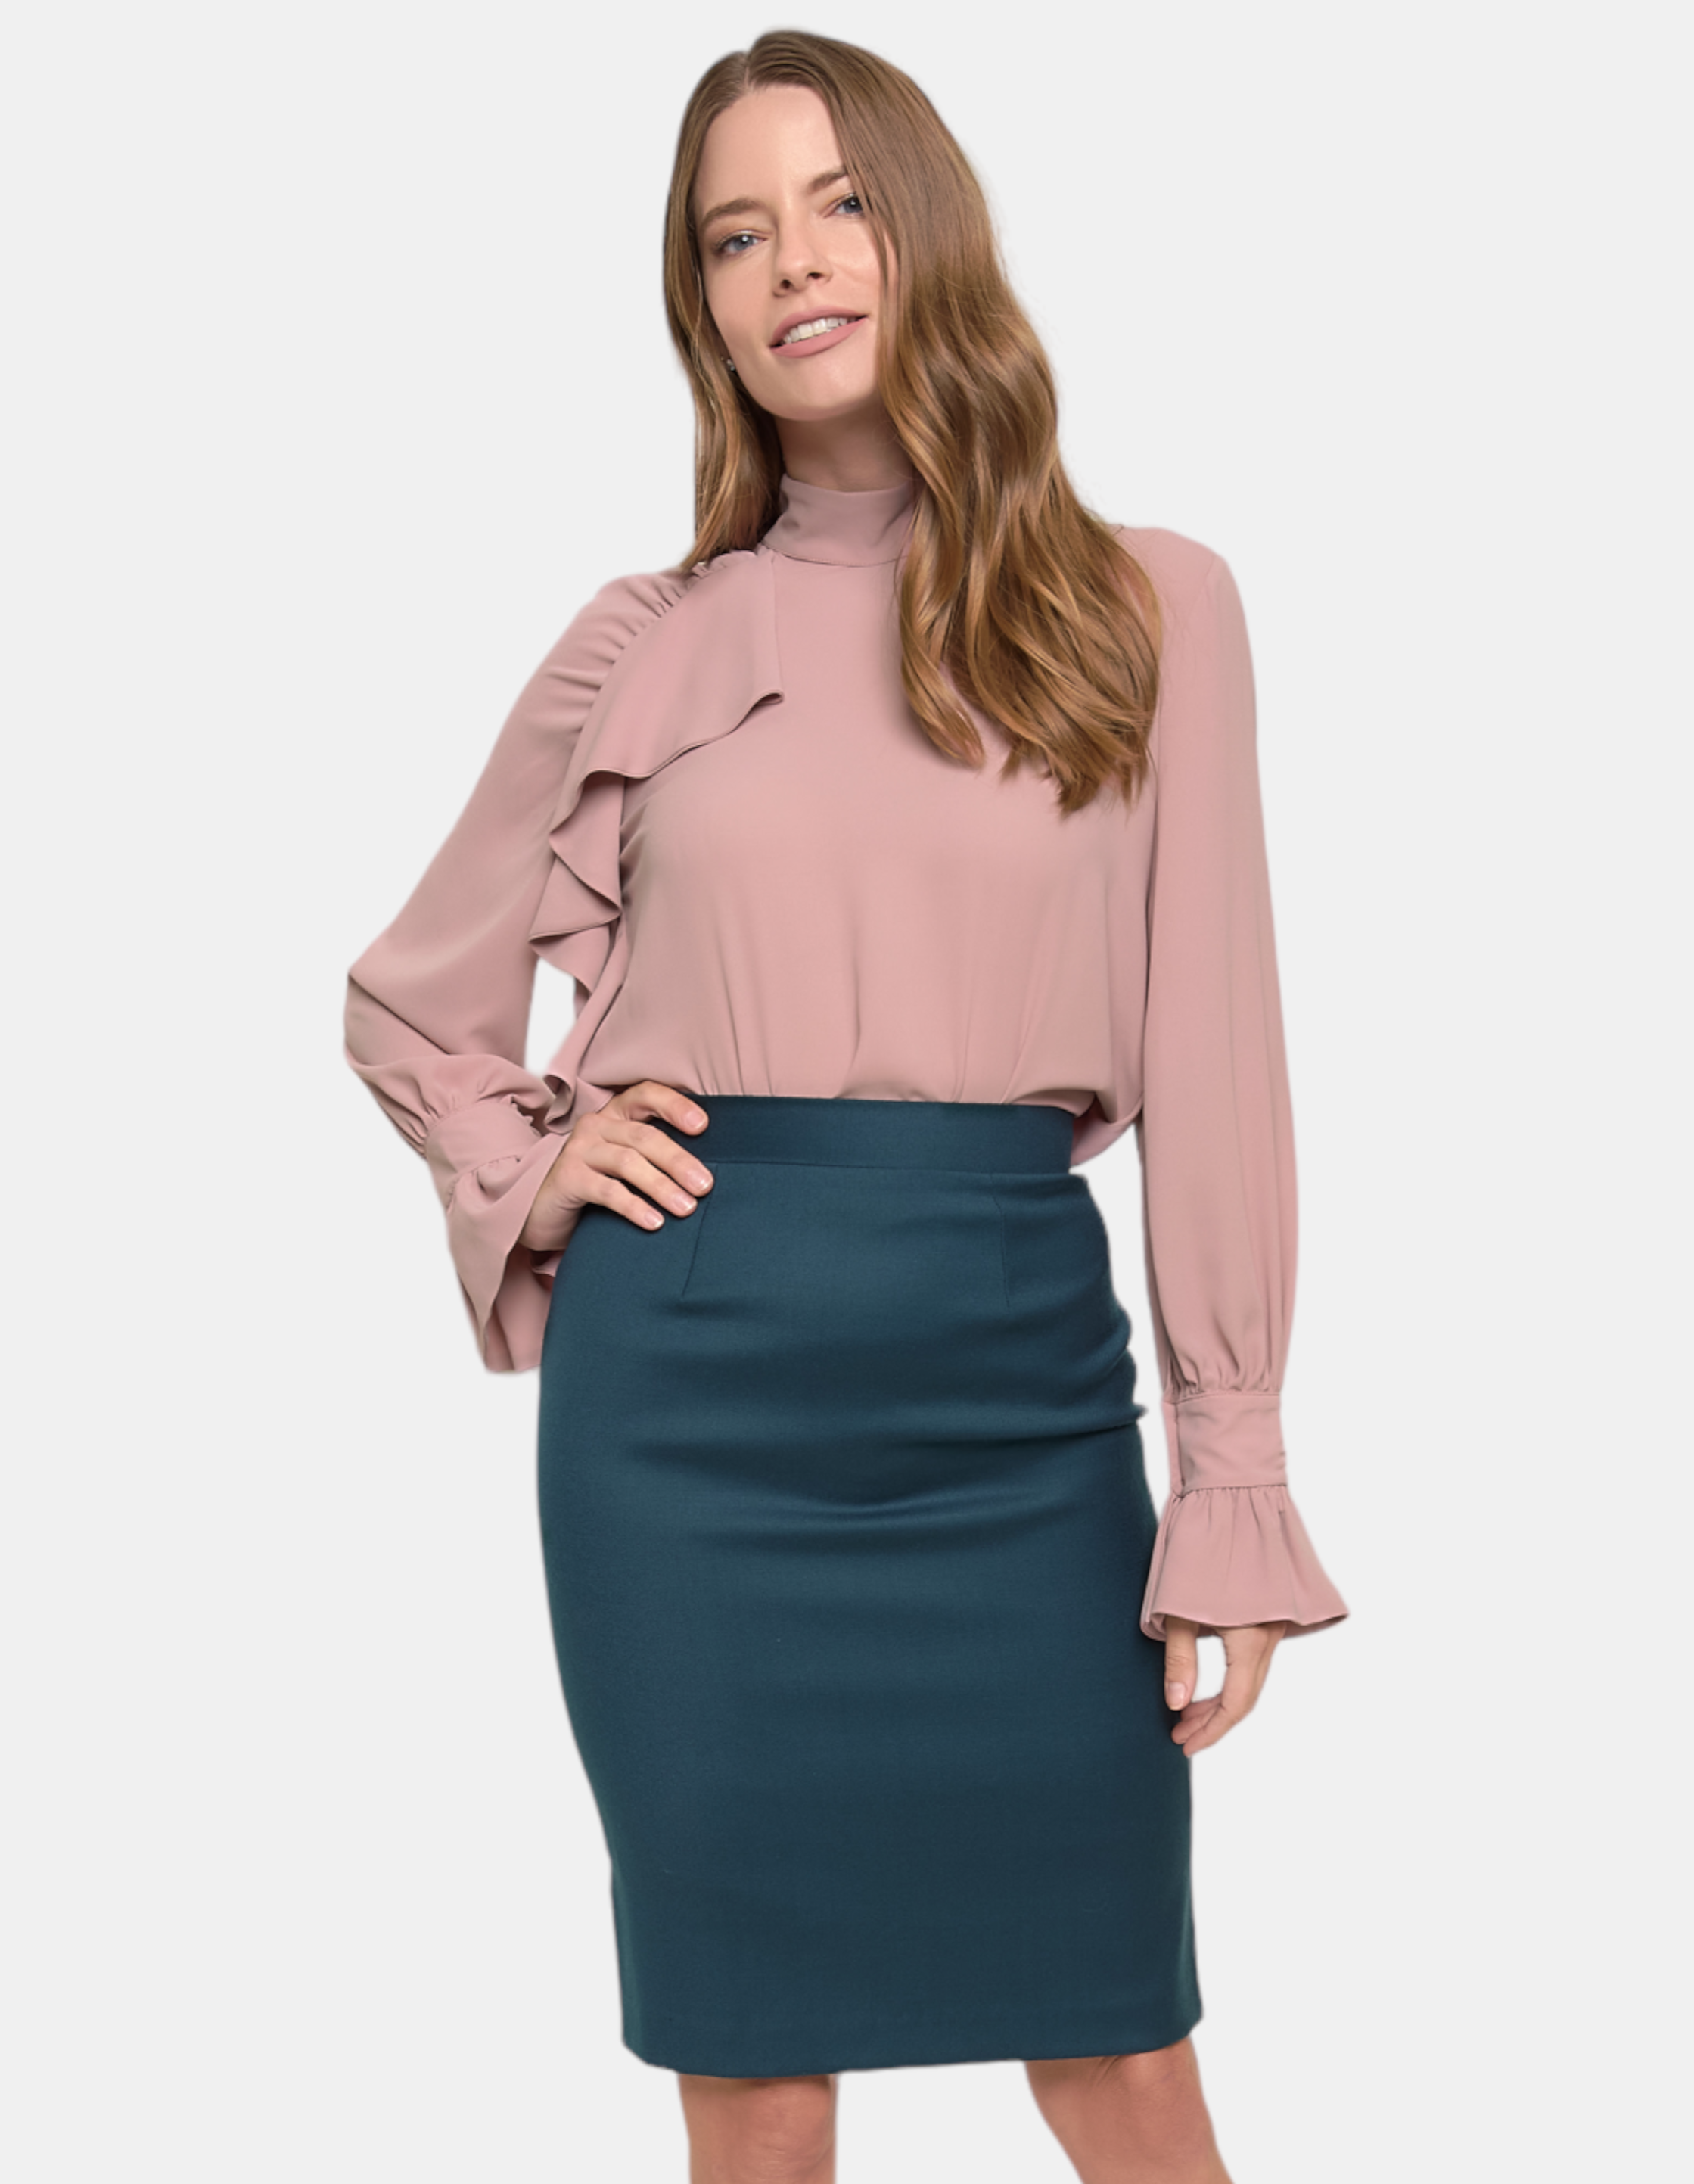 Sara Sabella Plus Size Anna Pink Soft Ruffled Lightweight Blouse With Blue Marine Skirt Front View- Made in Italy Women's Clothing